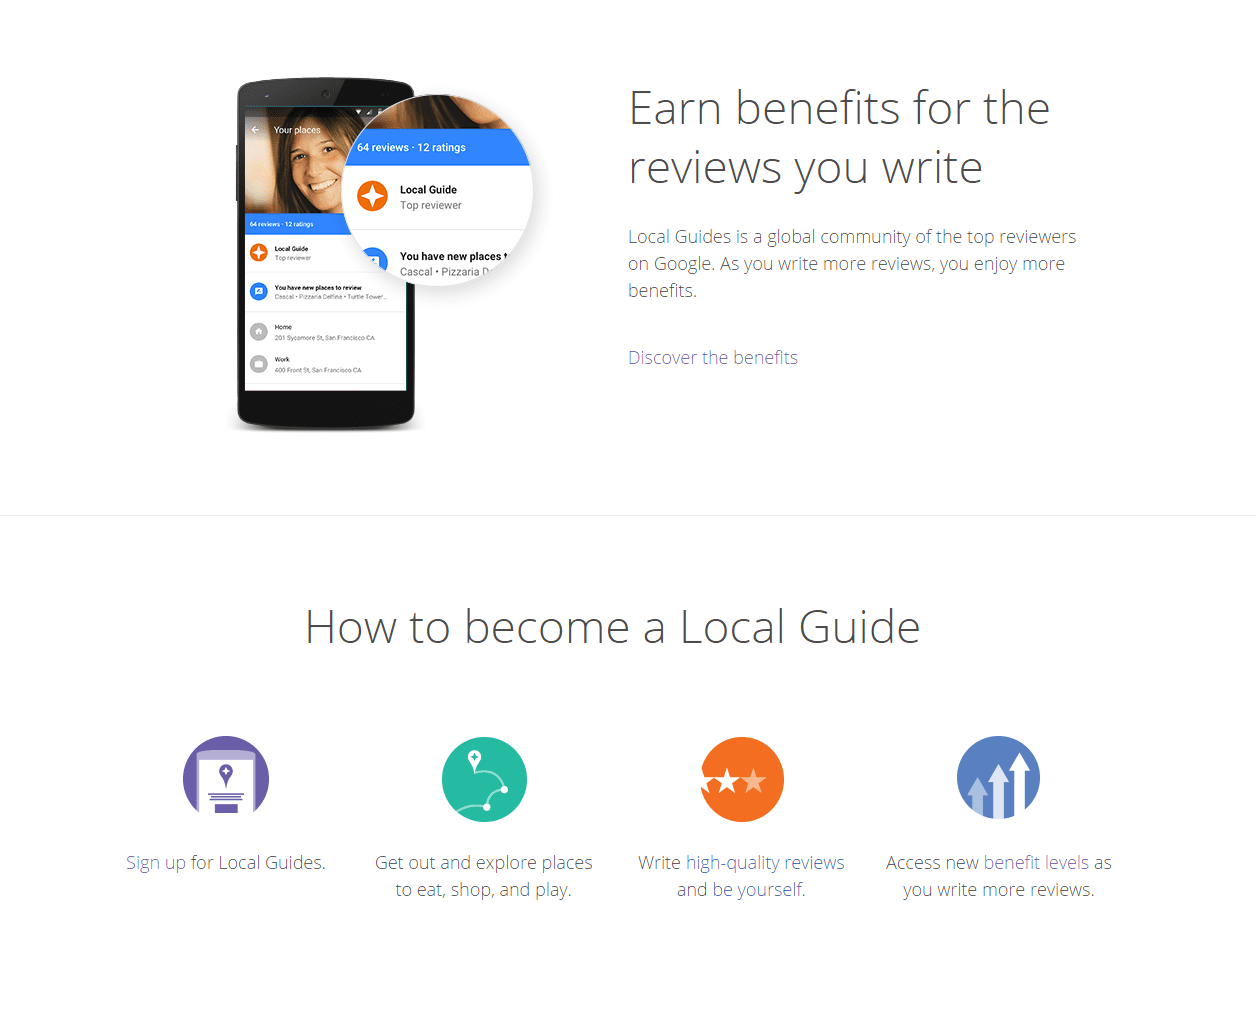 Google “Local Guides”